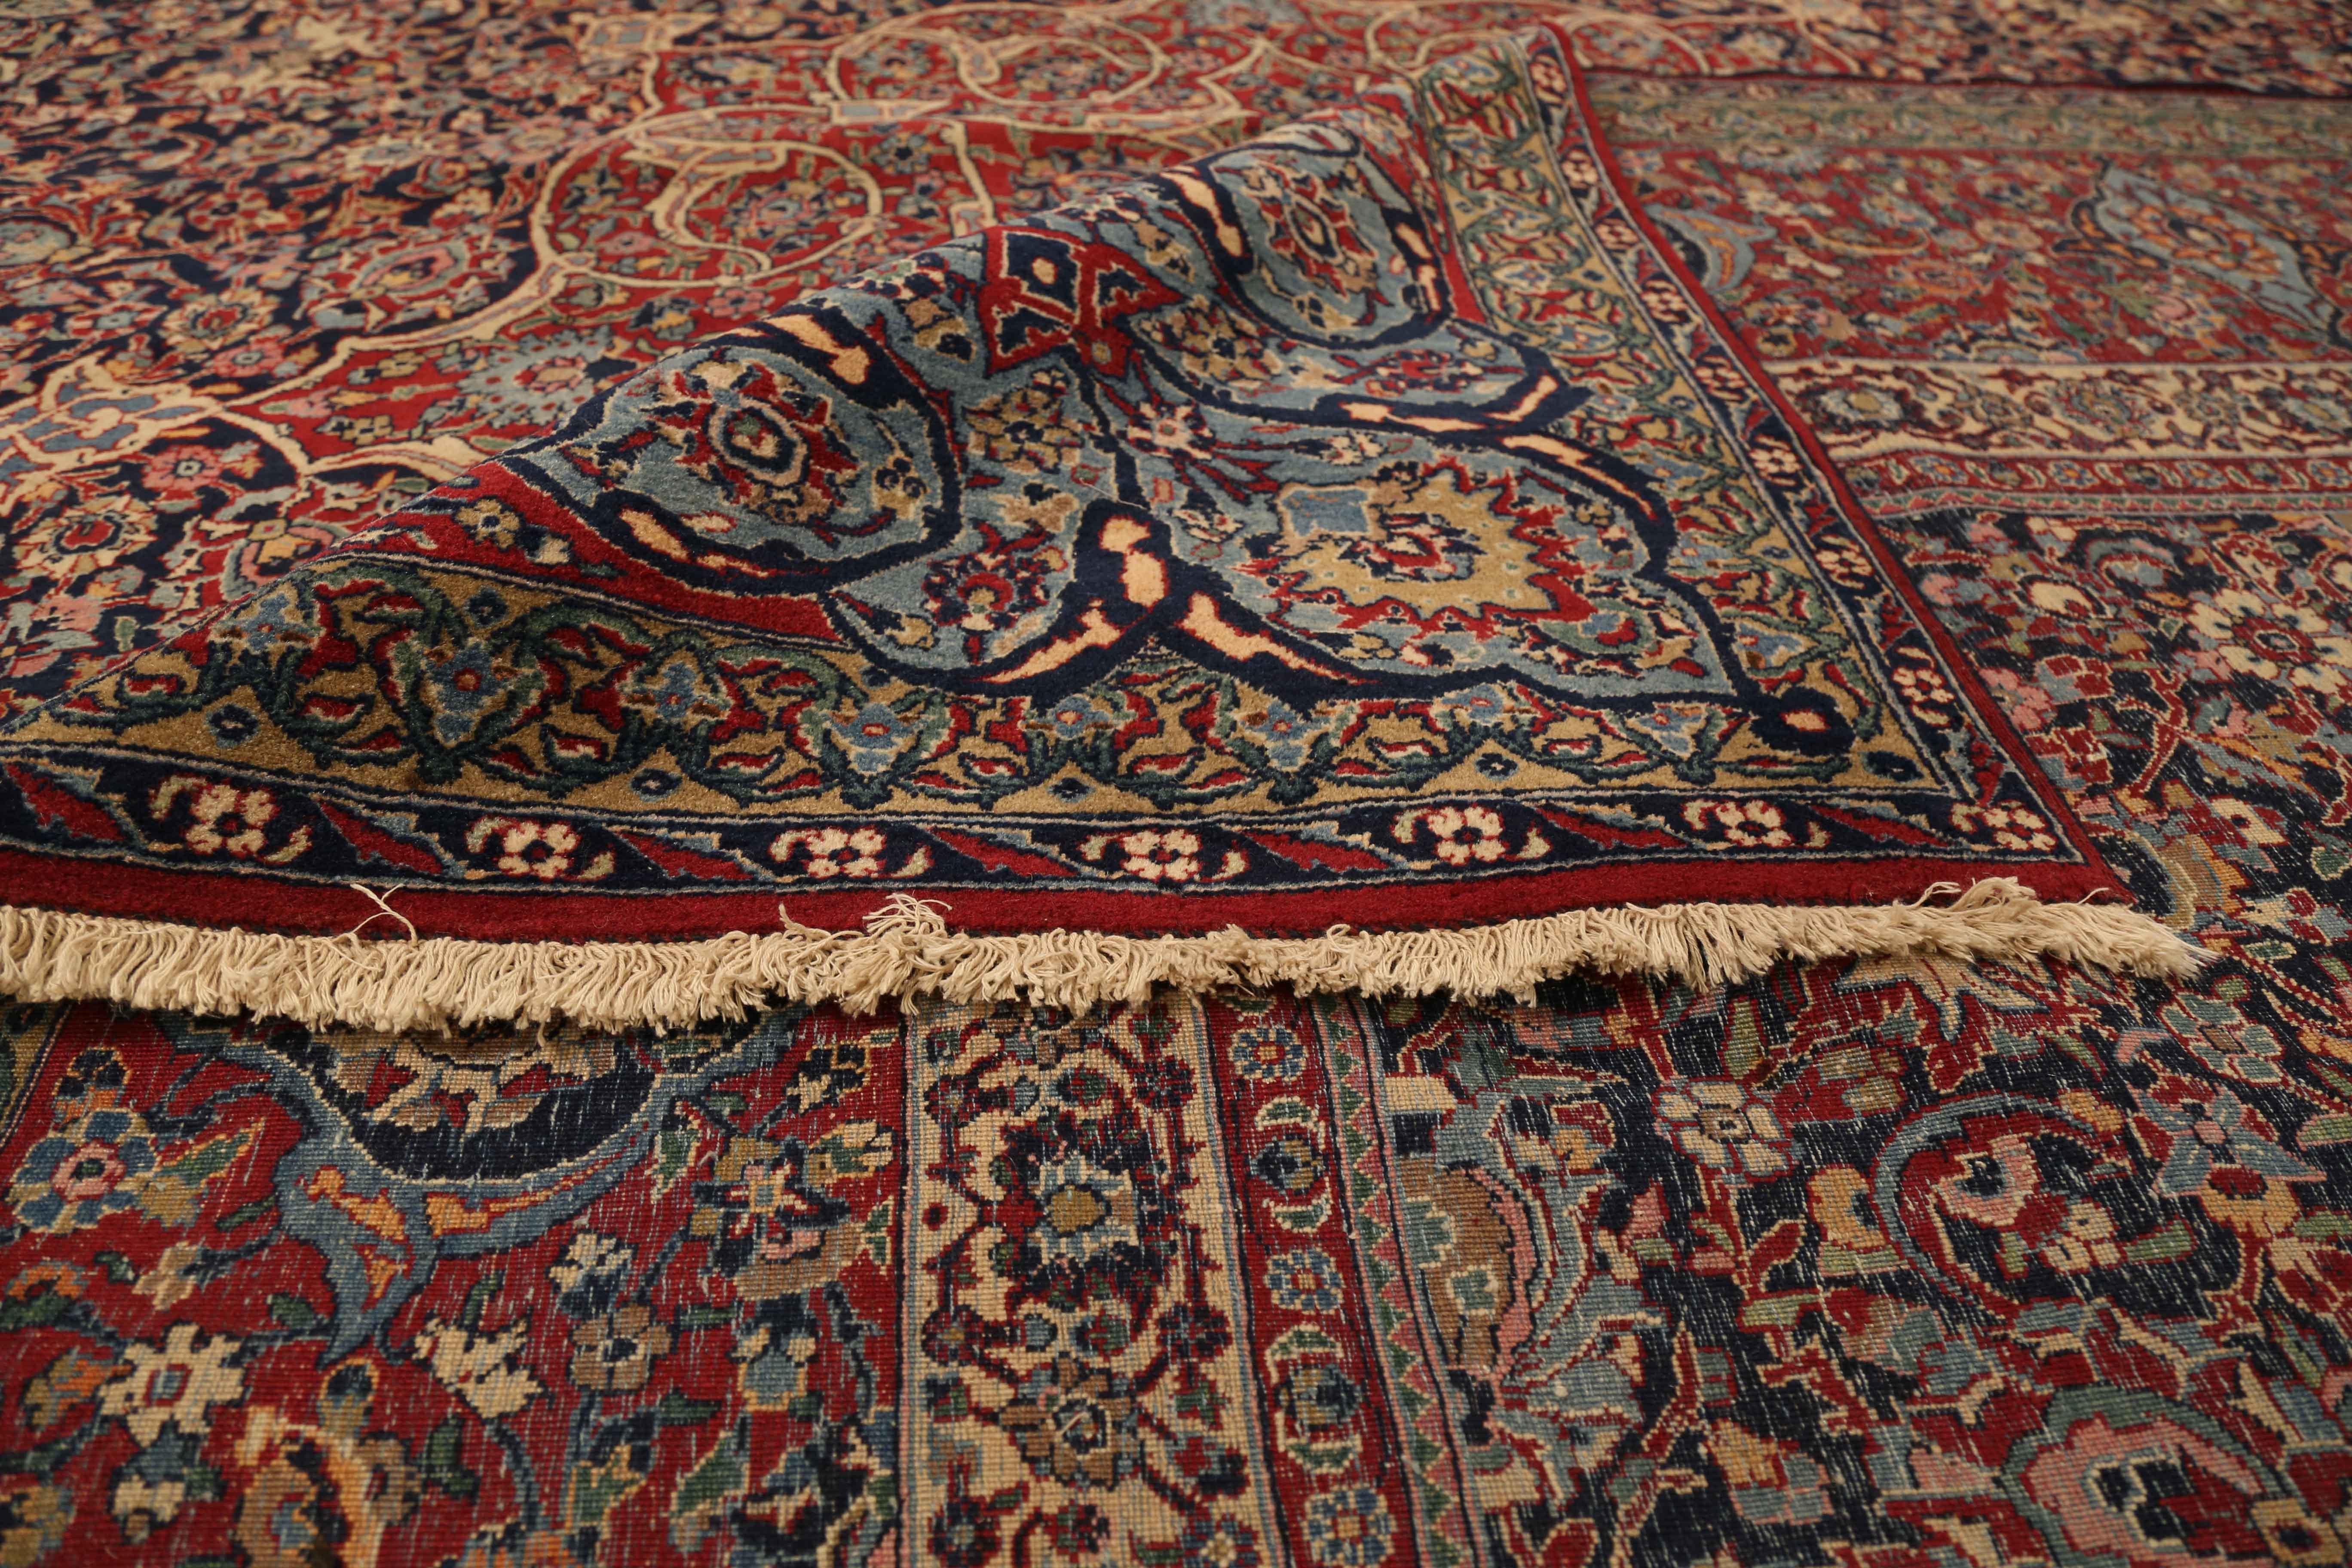 Antique Persian rug handmade in the 1960s era. Weavers used Fine and exquisite wool colored with rich all-organic vegetable dyes. It exhibits a grand design of highly intricate details woven together to form a stunning medallion at the centre